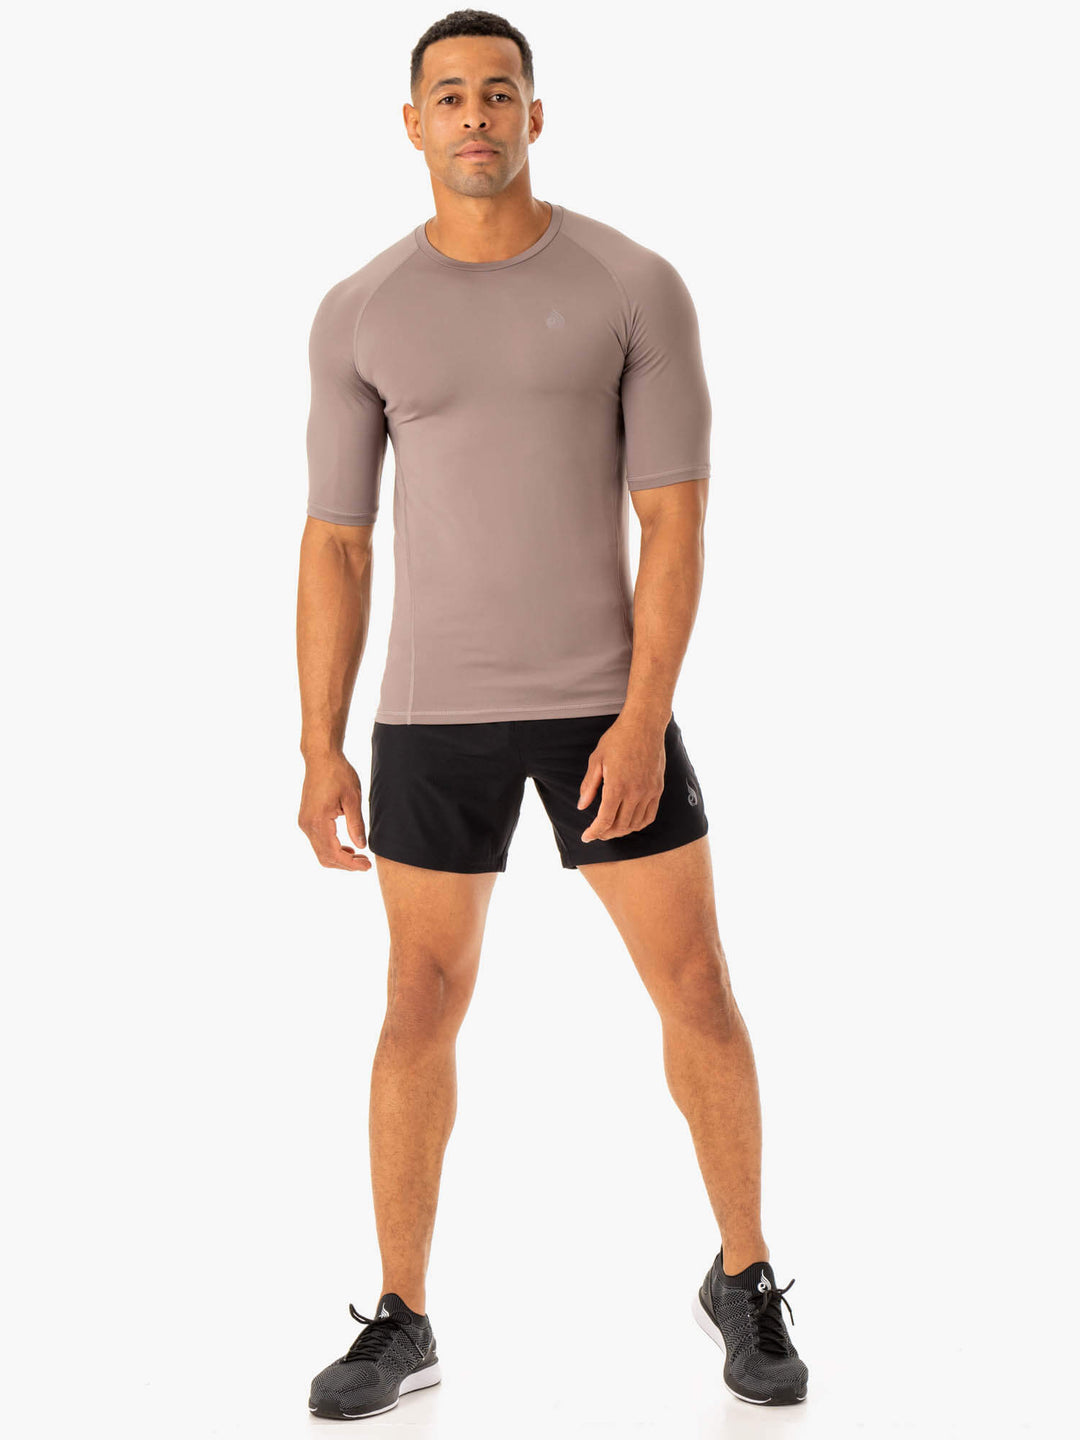 Division Base Layer T-Shirt - Taupe Clothing Ryderwear 